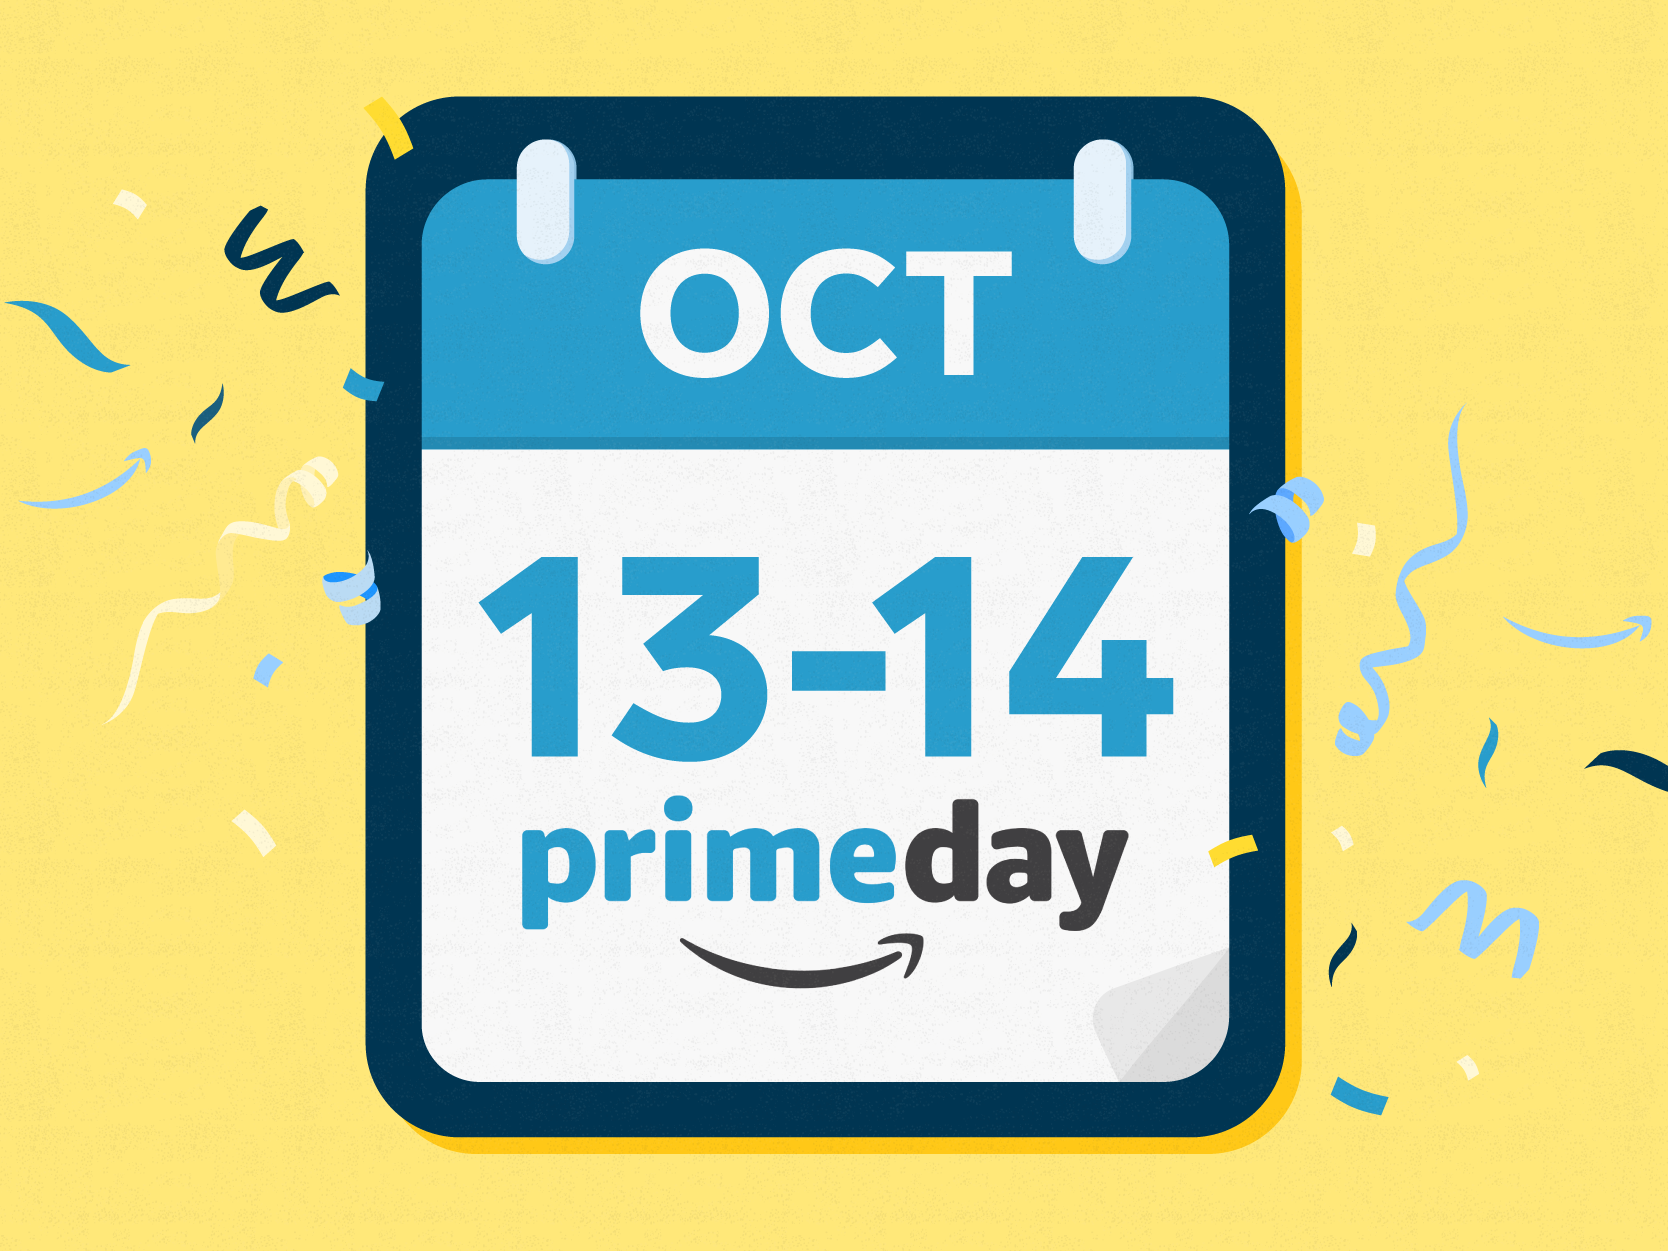 Amazon High Day 2020: All of the particular closing-minute deals serene on hand